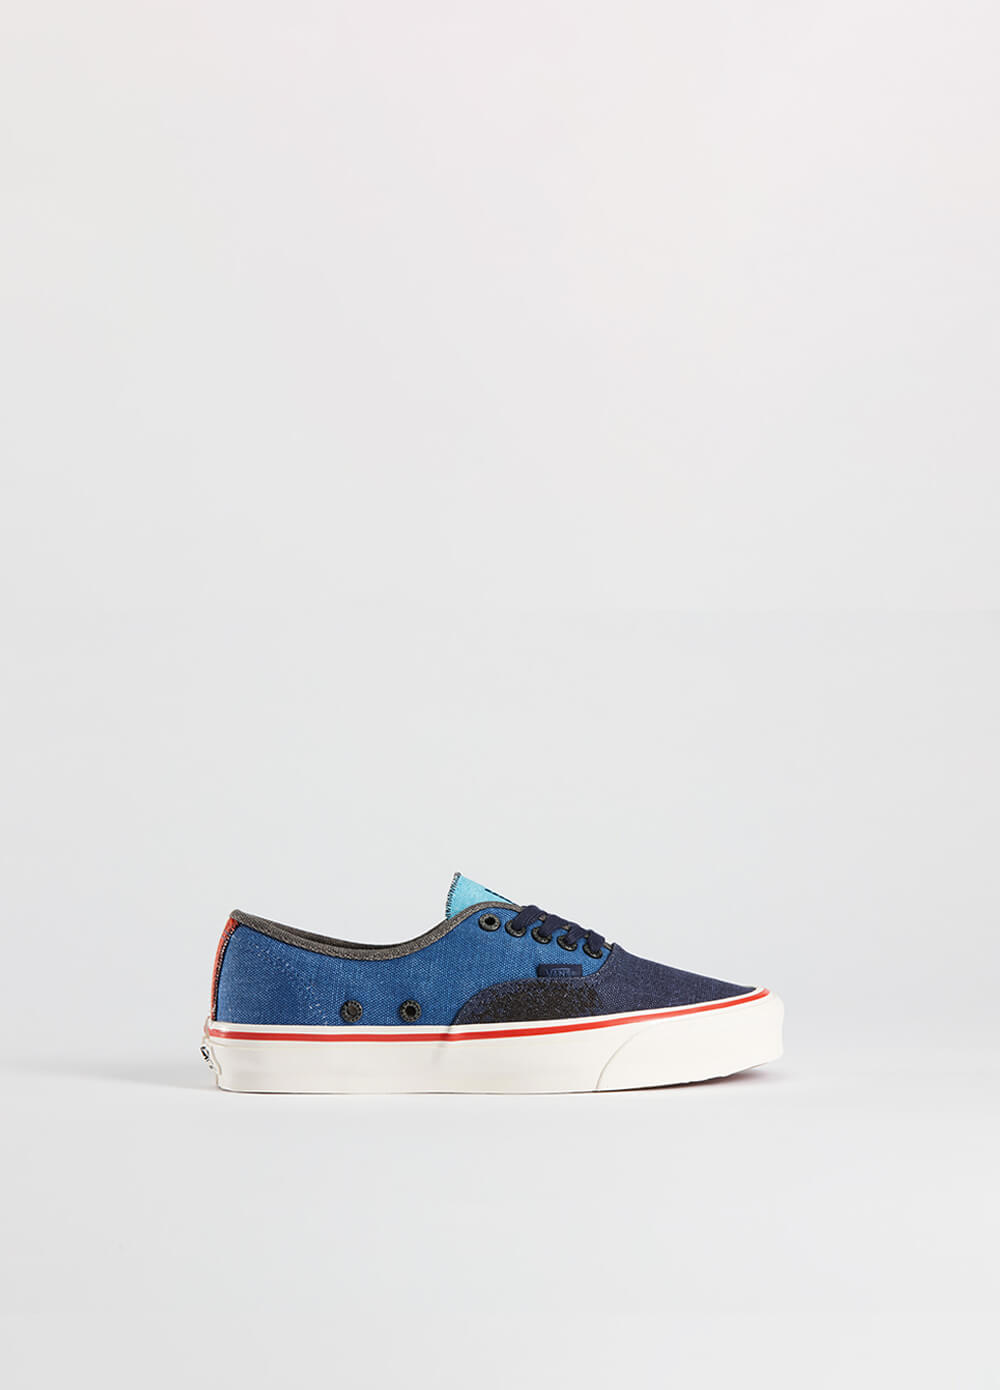 x Nigel Cabourn OG Authentic LX Sneakers